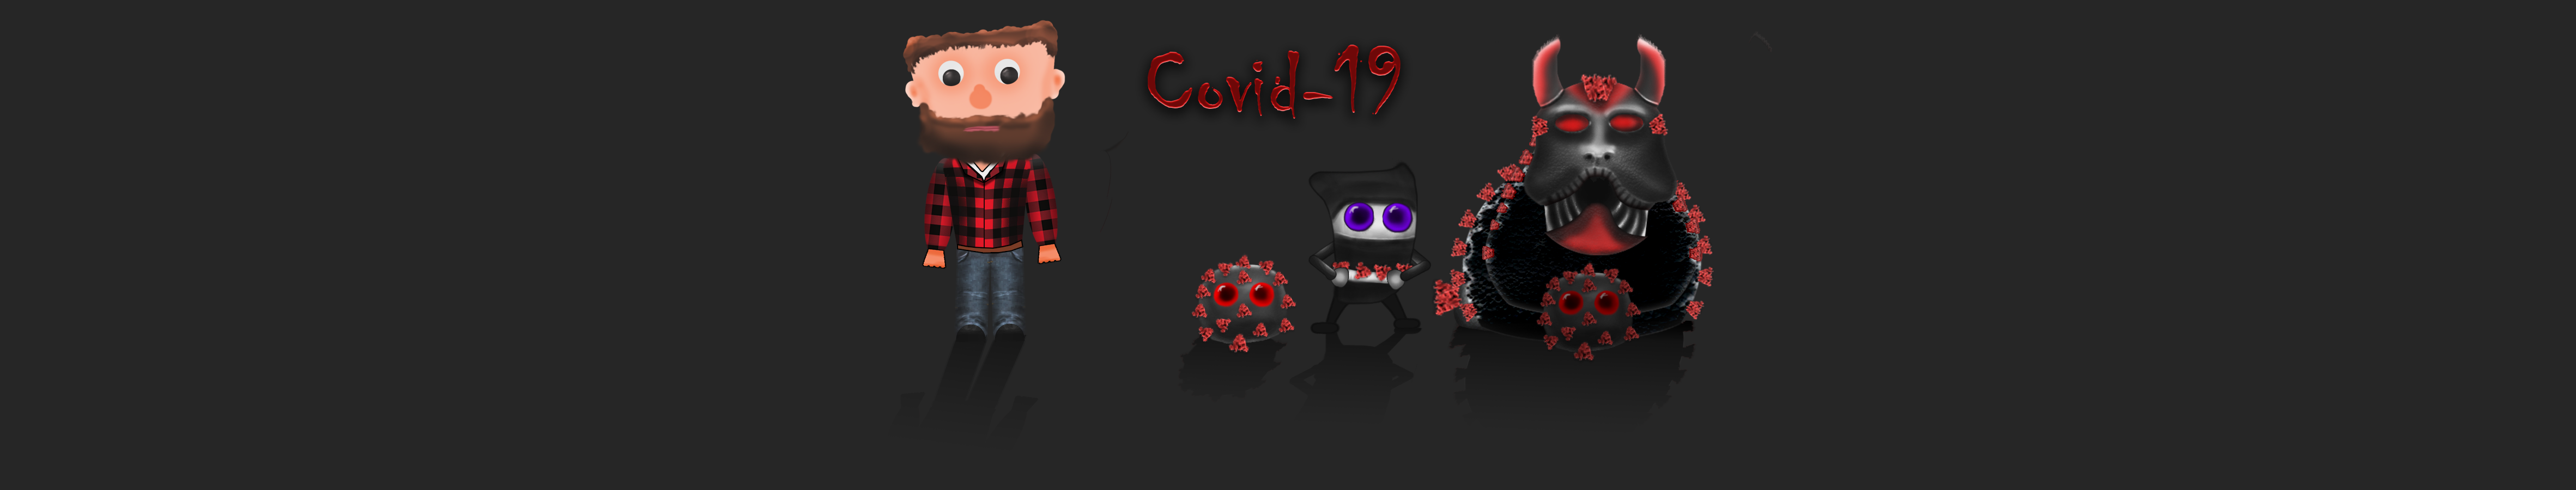 Covid-19 - Survive the infection